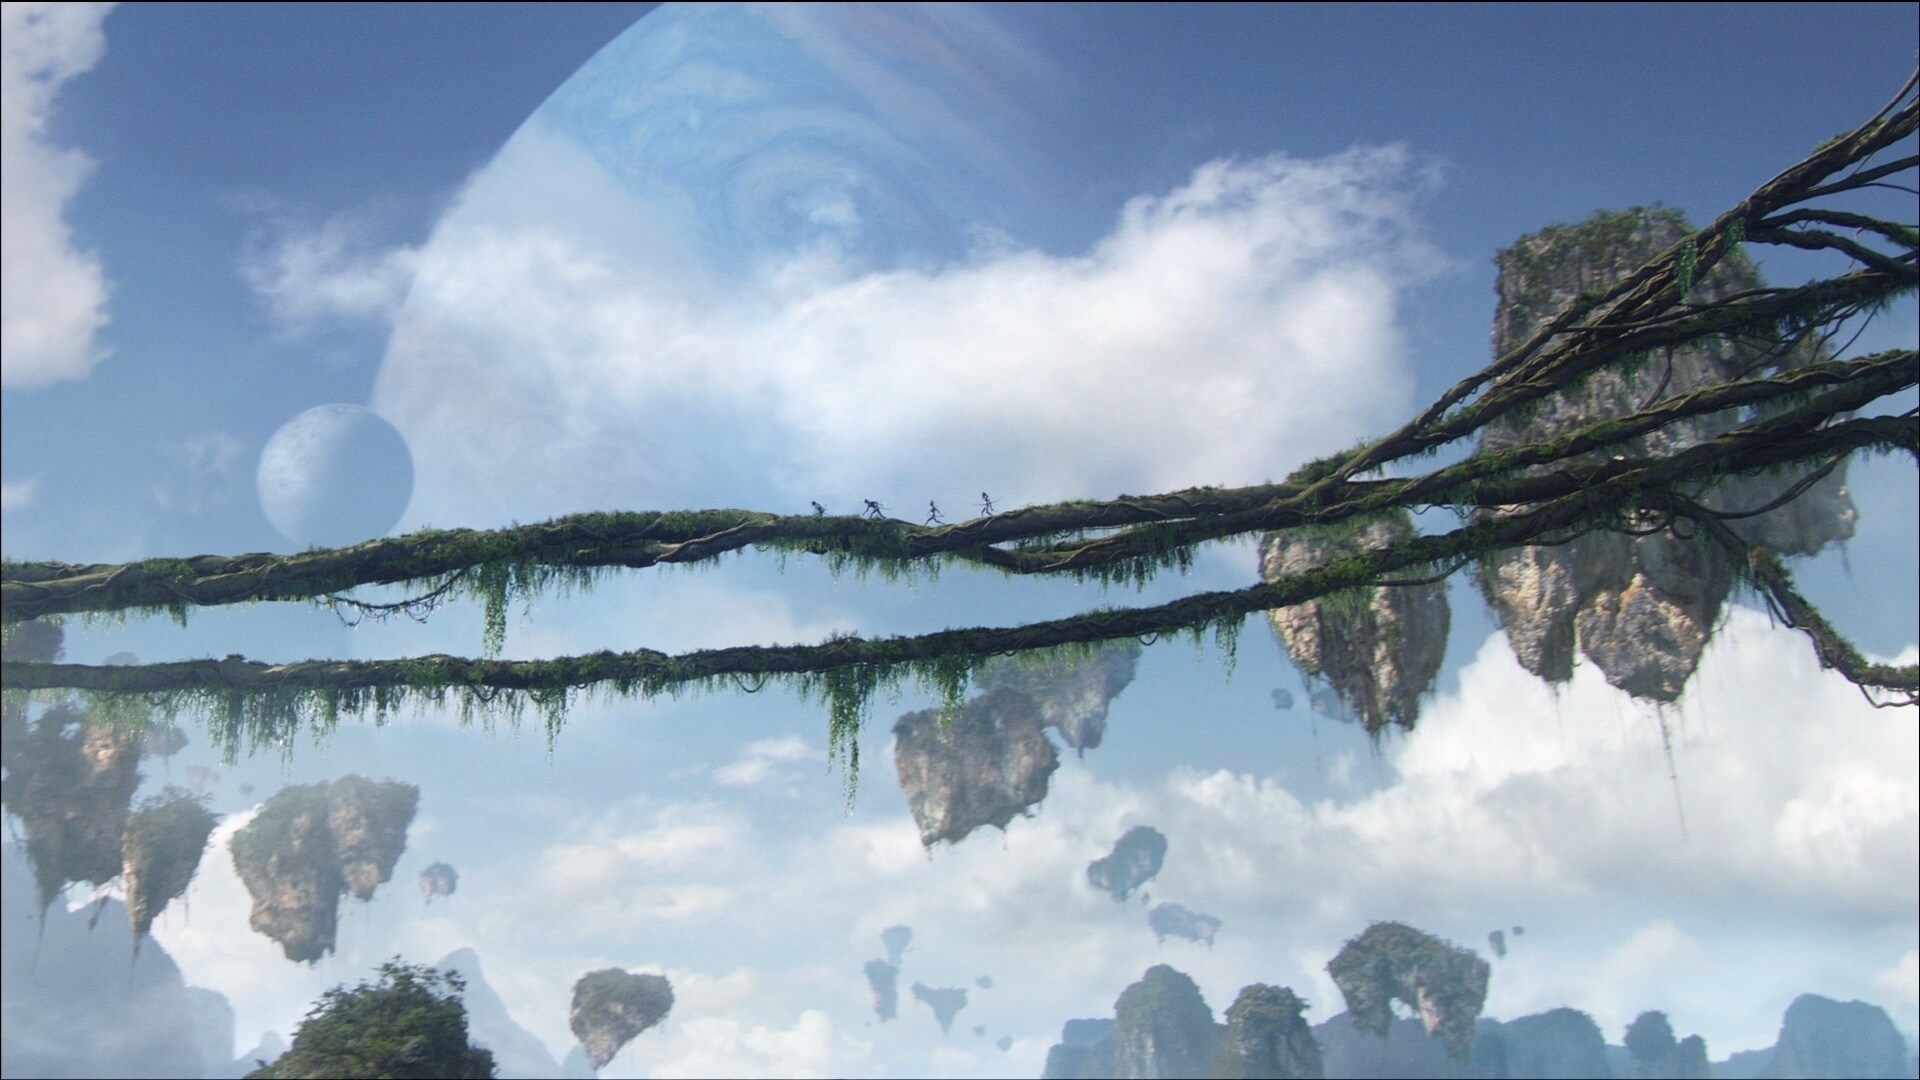 Vine Highways stretching across Pandora's floating mountains, in the daytime sky background, gas giant planet Polyphemus is visible.